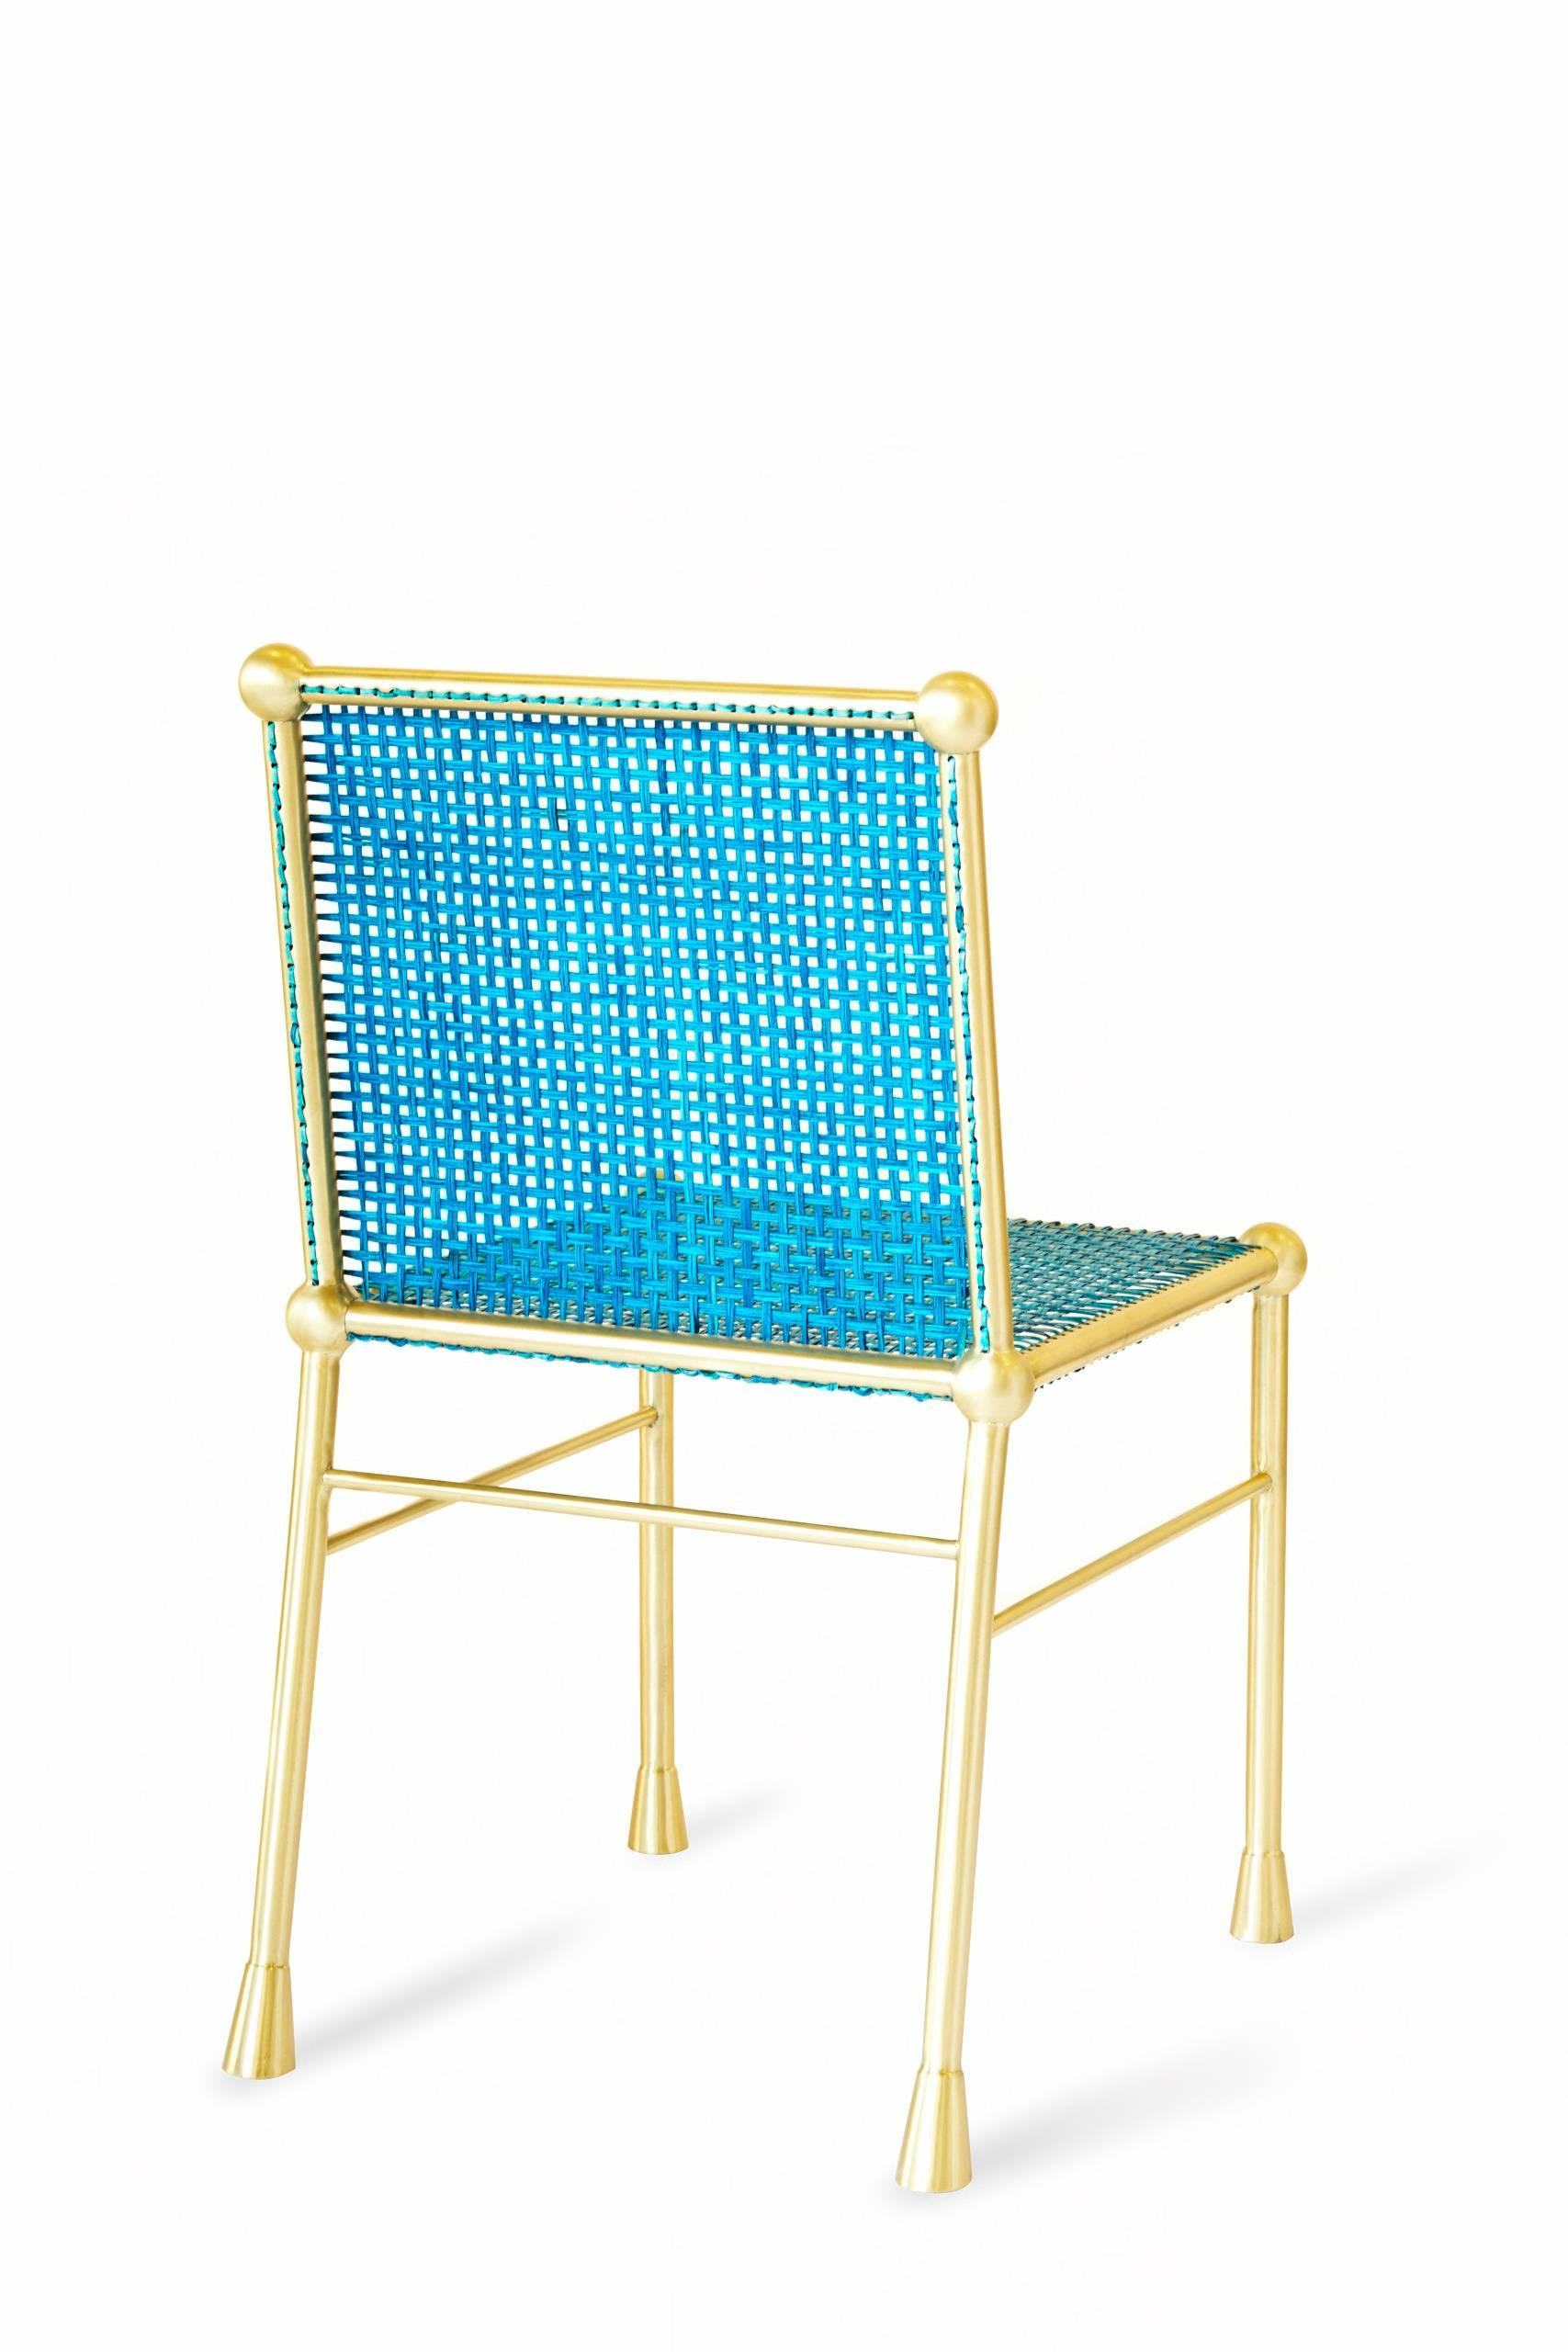 Contemporary Solid Brass Chair With Hand Woven Blue Cane For Sale